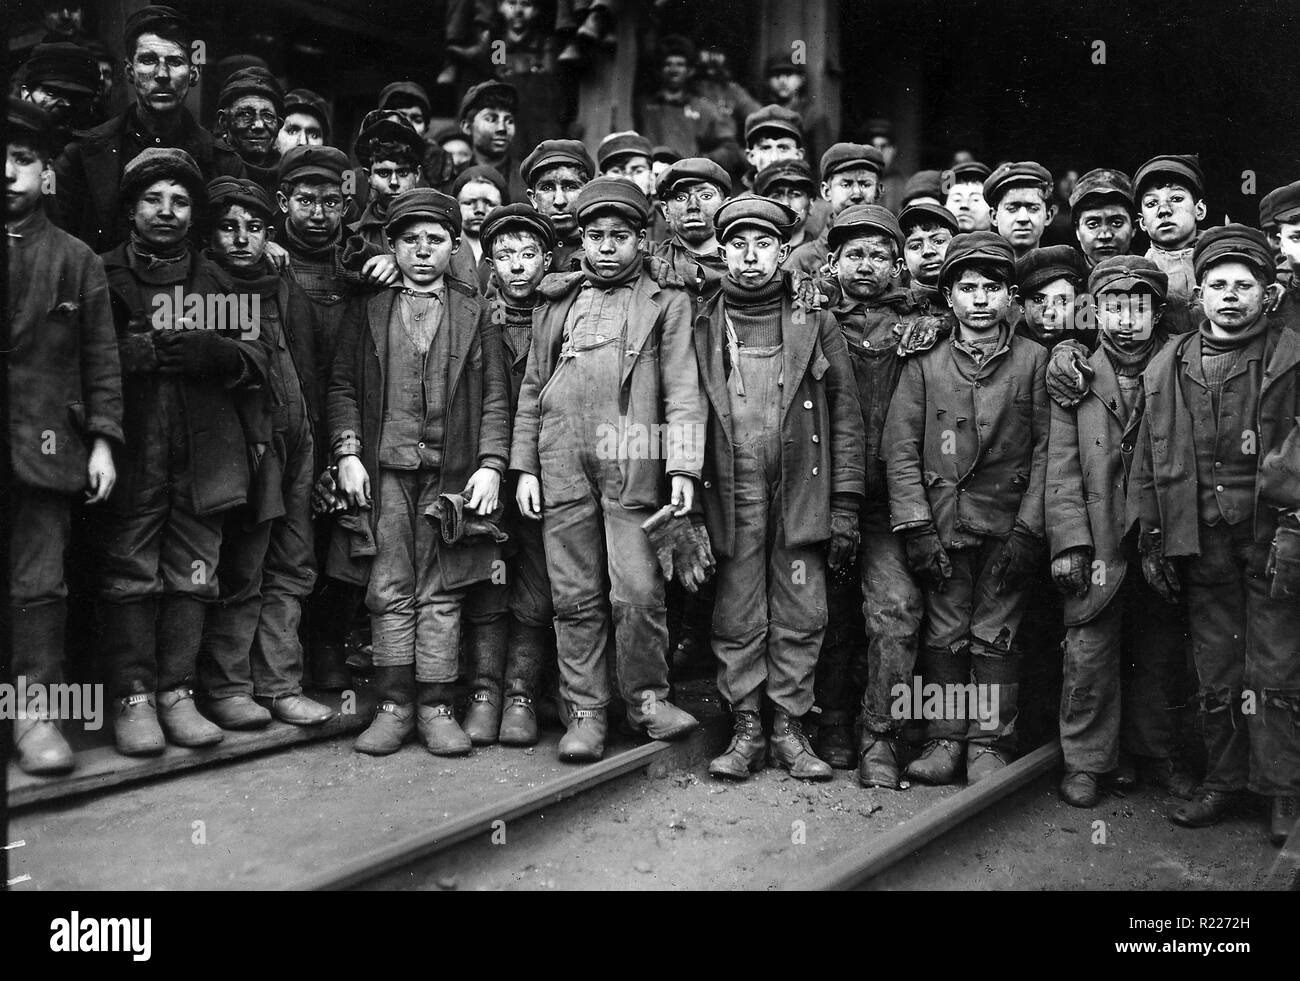 Breaker boys working in Ewen Breaker Coal Mine, South Pittston, Pennsylvania, USA 1910. A breaker boy was a coal-mining worker in the United States and United Kingdom, whose job was to separate impurities from coal by hand in a coal breaker. breaker boys were primarily children. The use of breaker boys began in the mid-1860s and did not end until the 1920s. Stock Photo